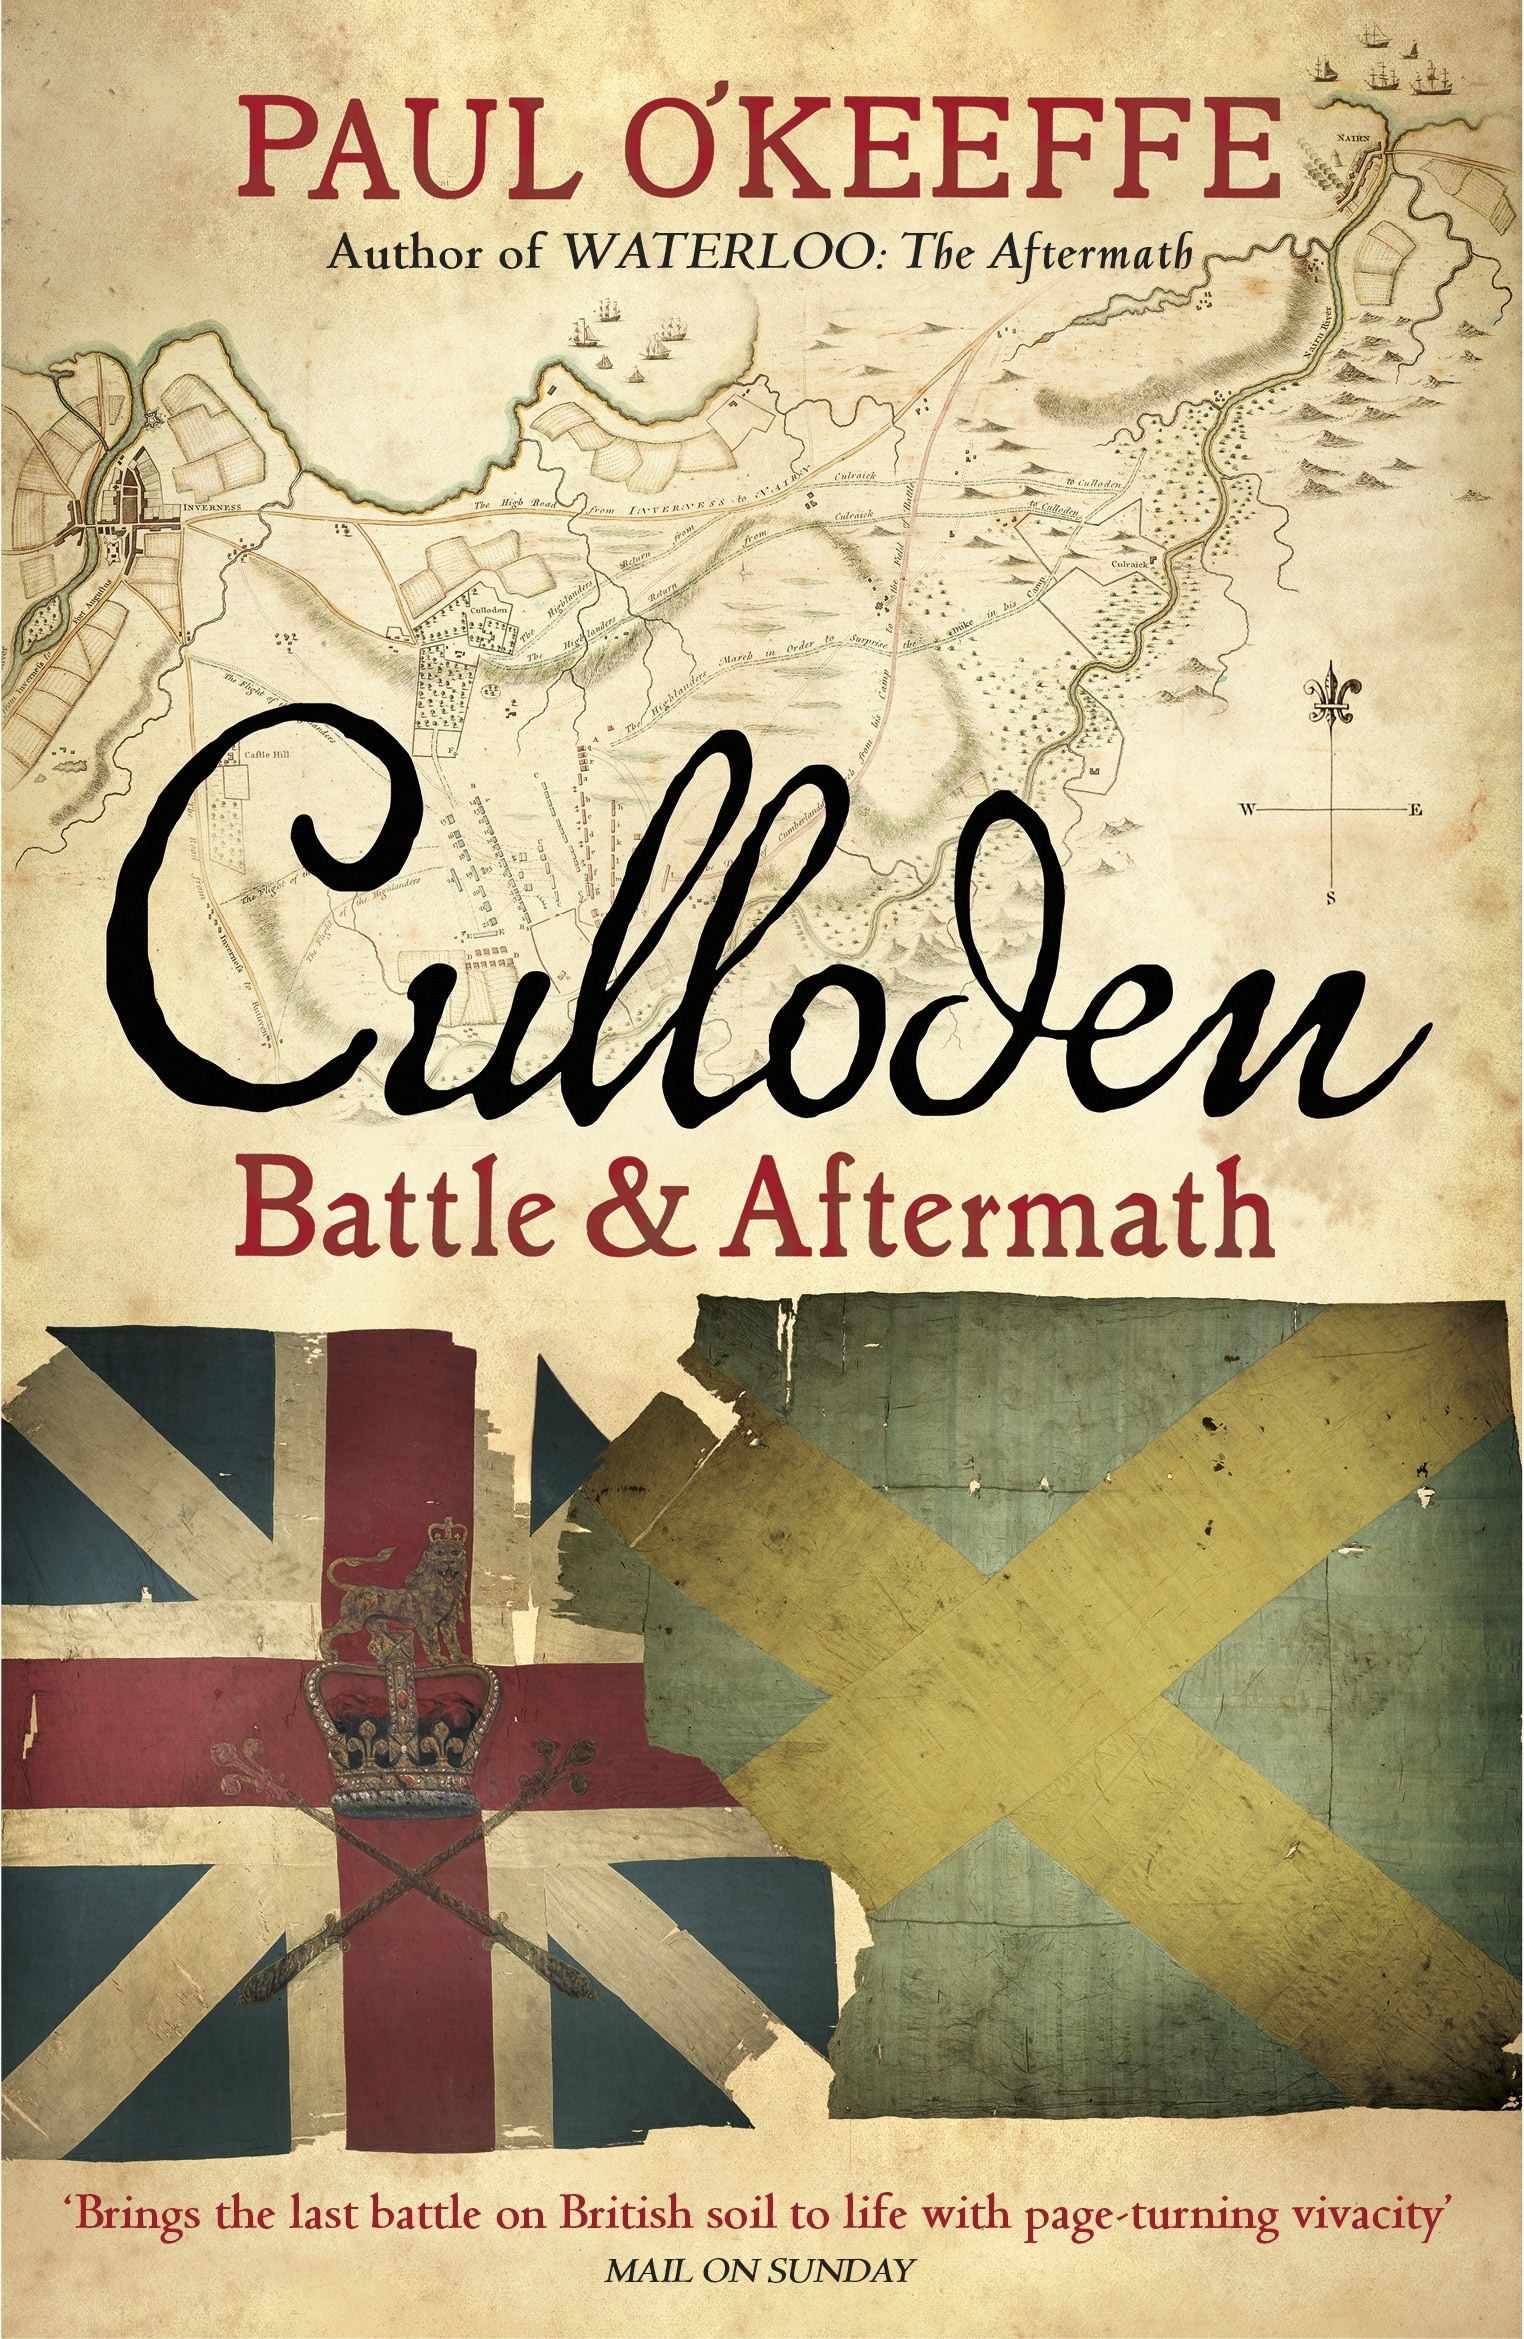 Book “Culloden” by Paul O'Keeffe — January 12, 2023